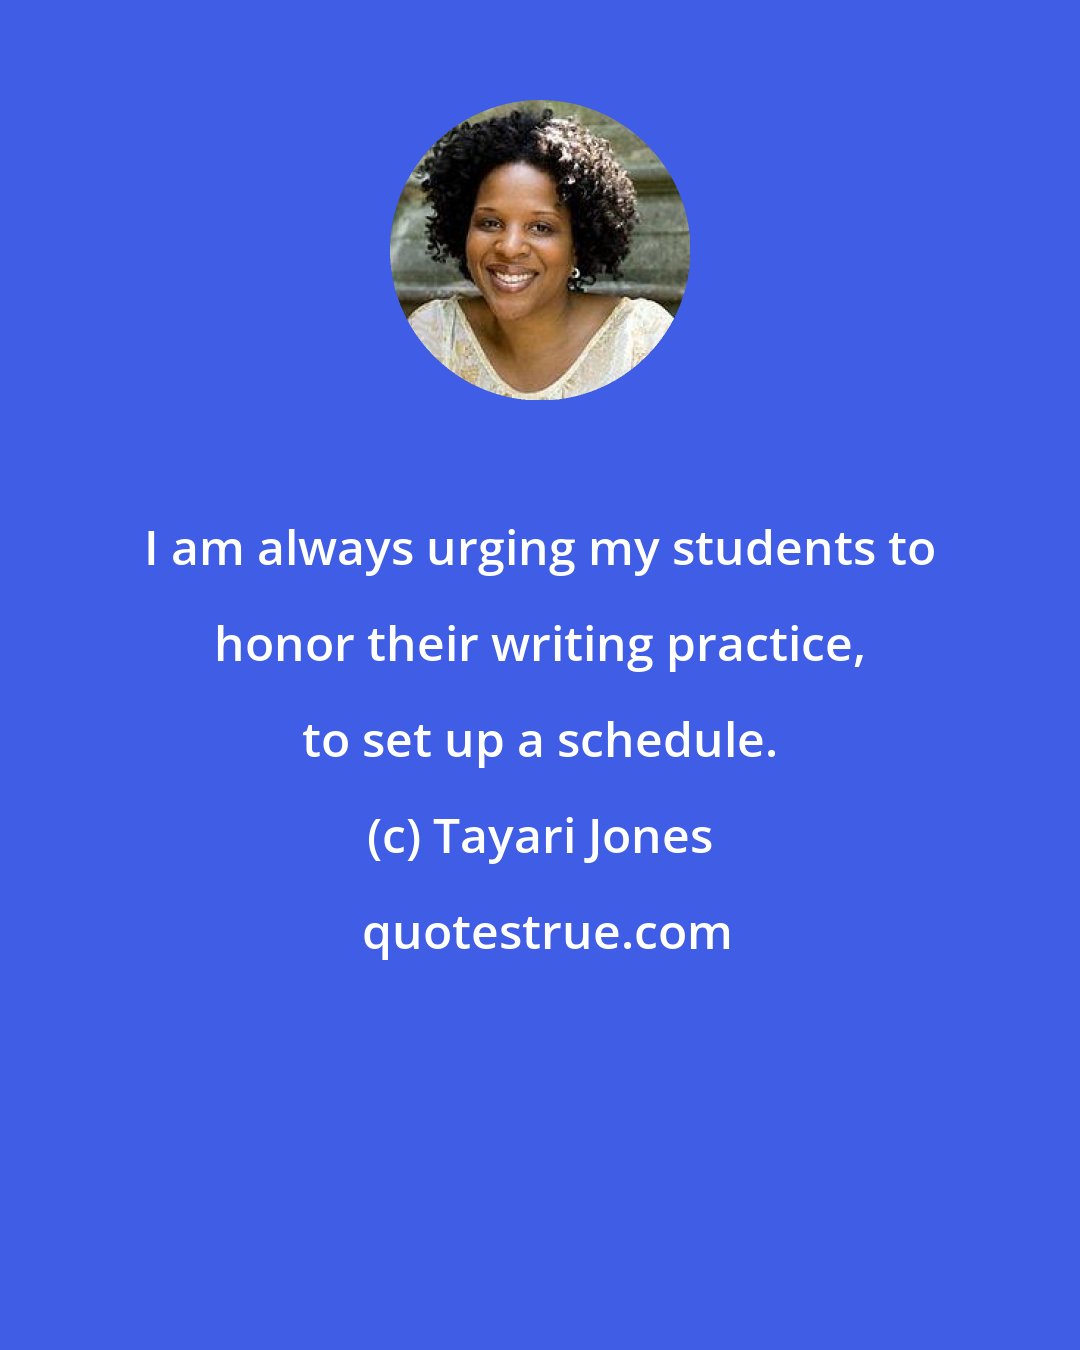 Tayari Jones: I am always urging my students to honor their writing practice, to set up a schedule.